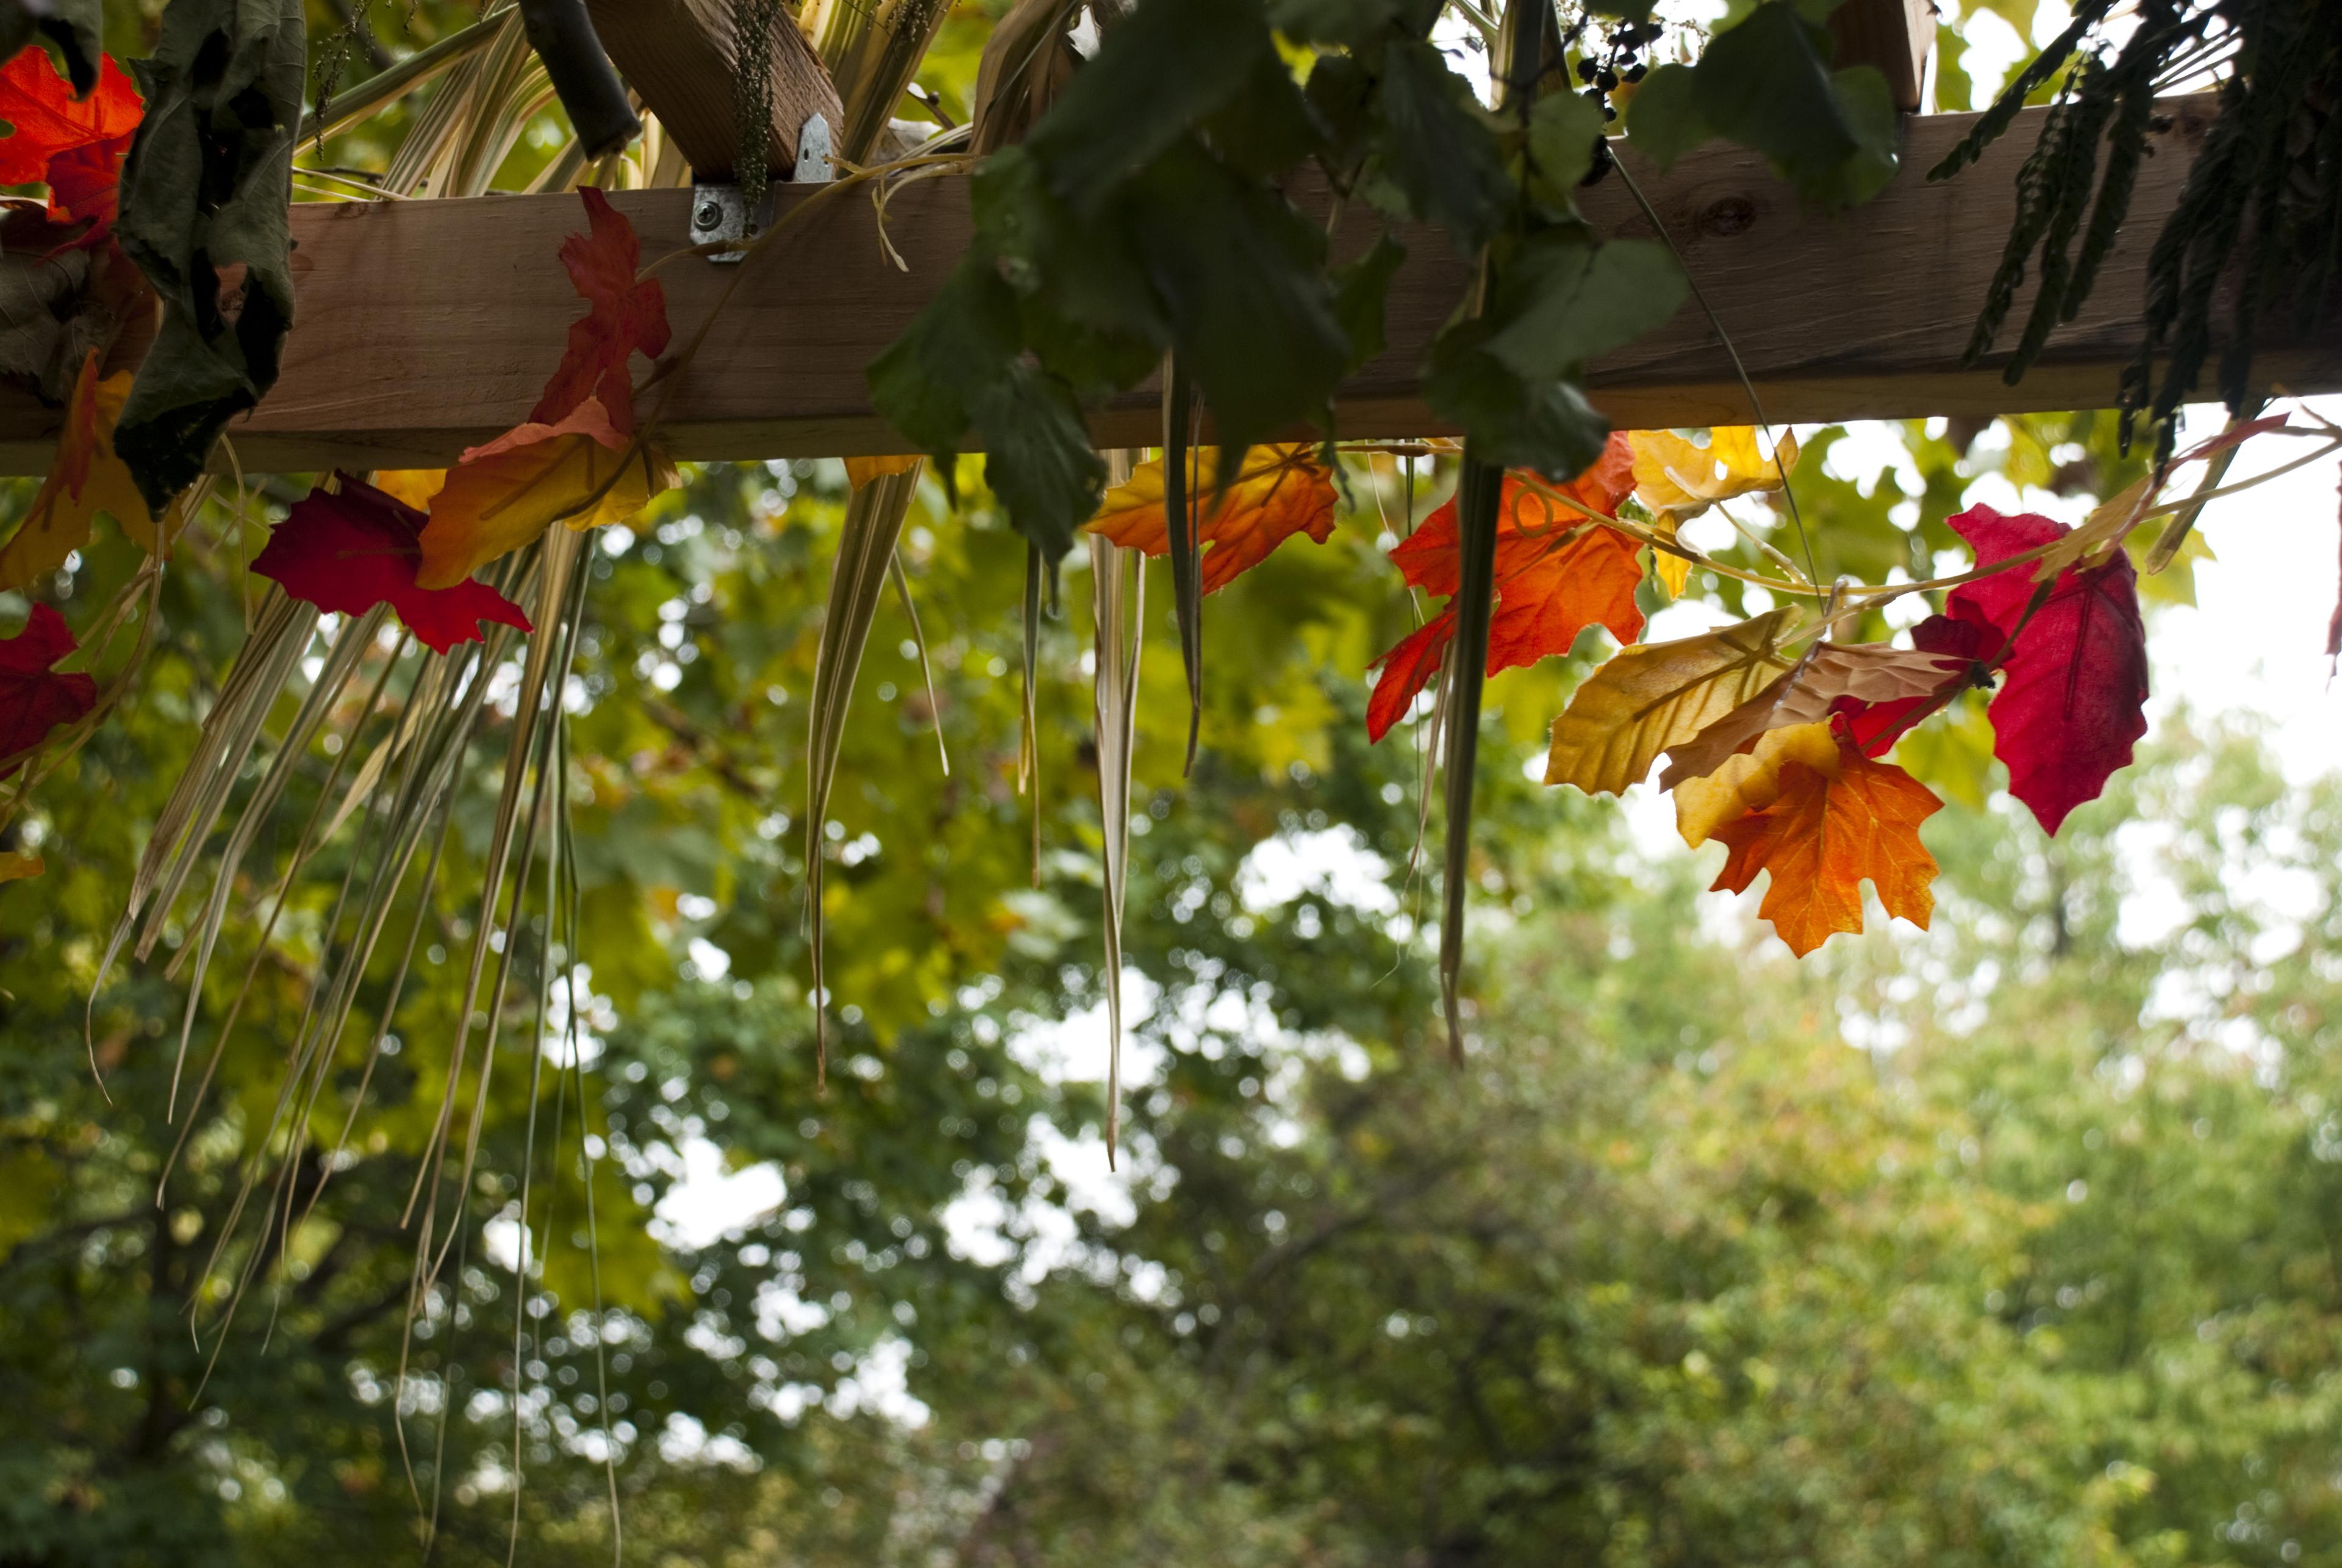 The edge of a sukkah, decorated with leaves and vines